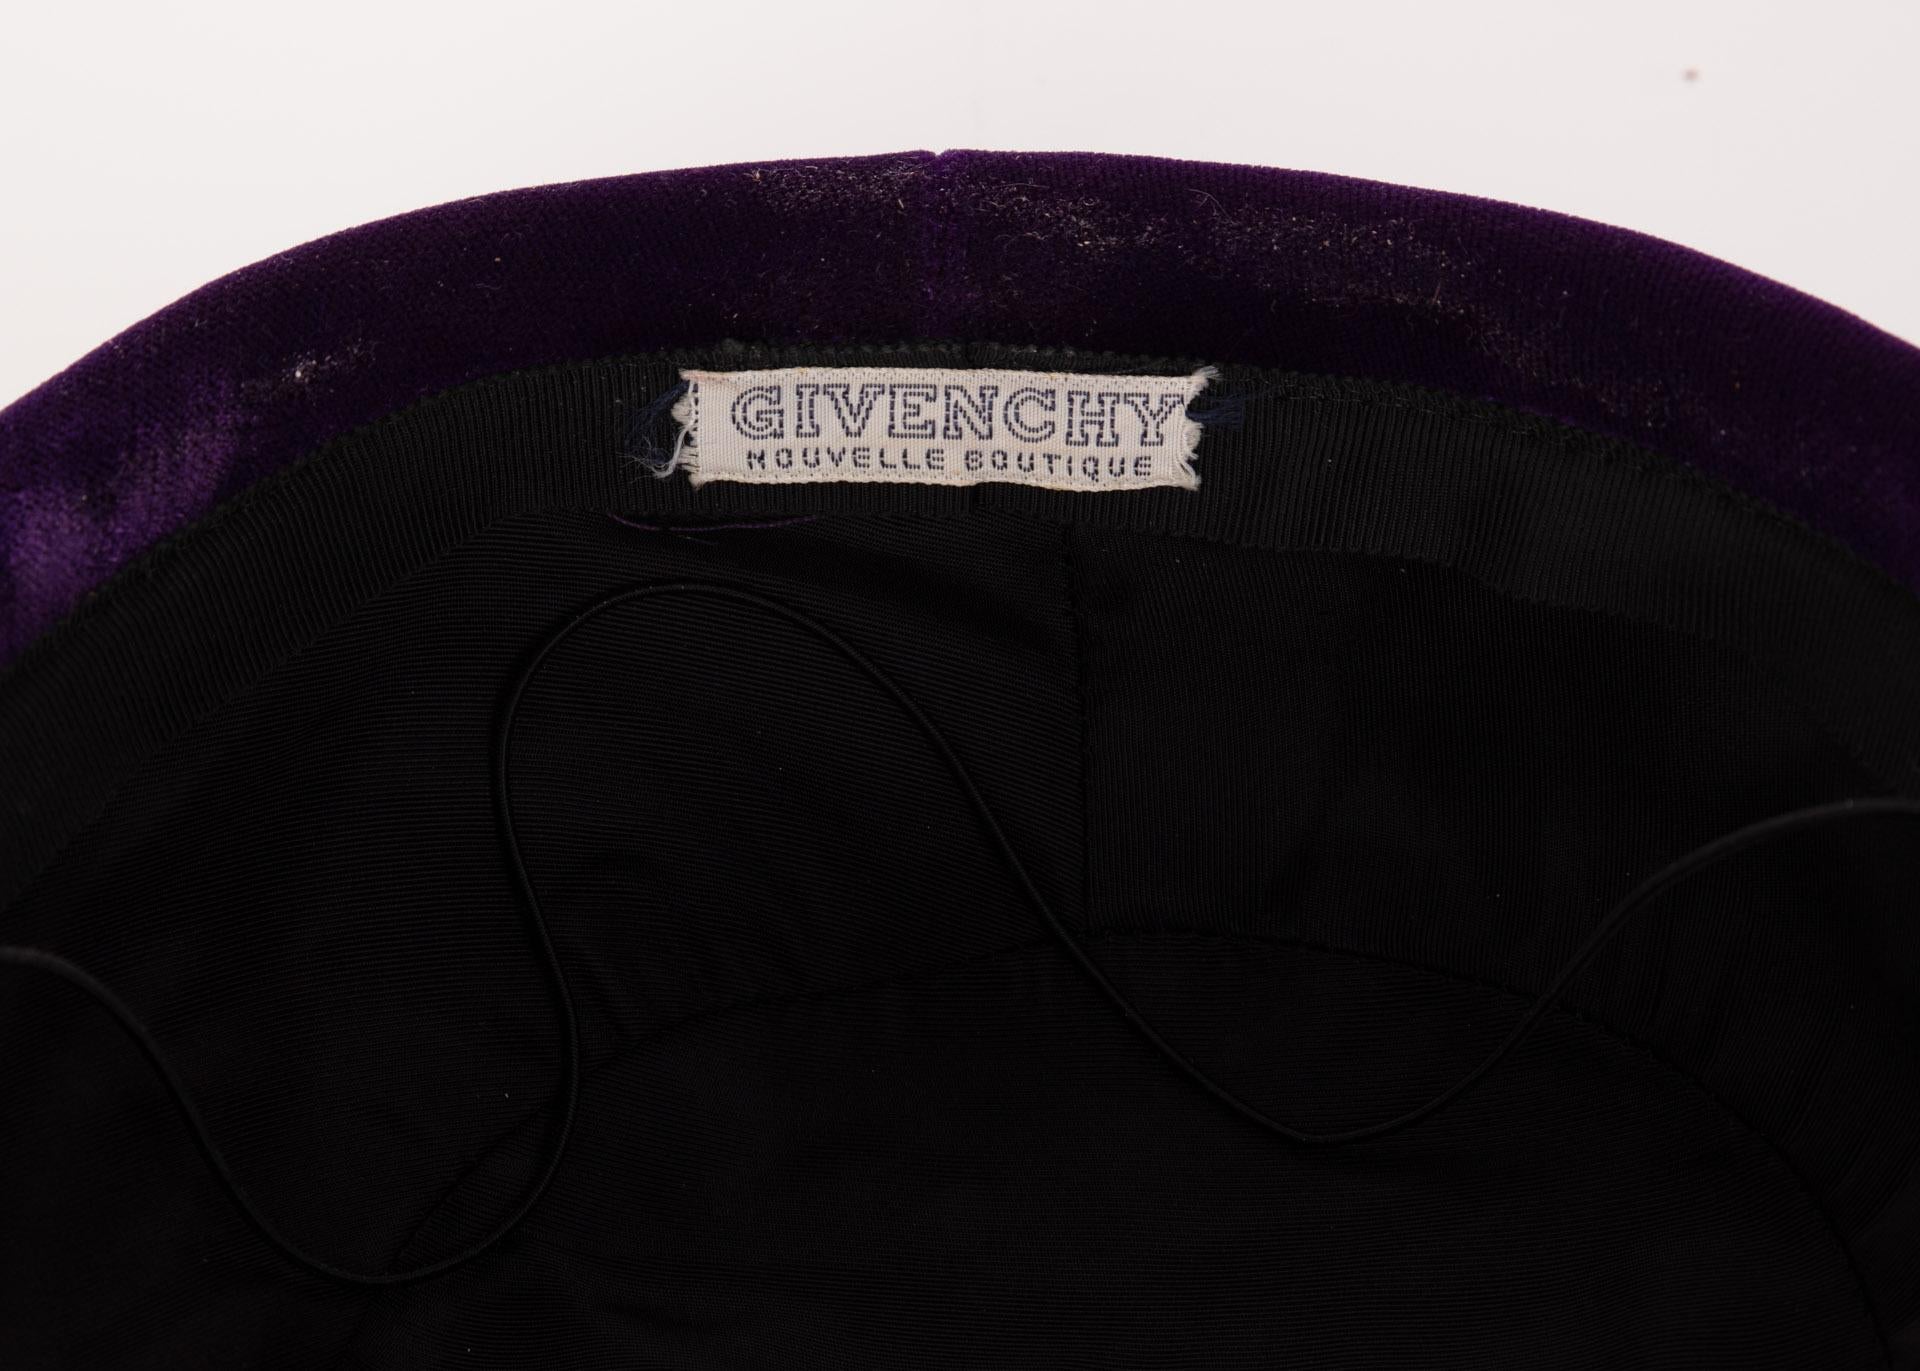 Givenchy Amethyst Purple Velvet Bumper Hat, 1970s  In Excellent Condition For Sale In Boca Raton, FL